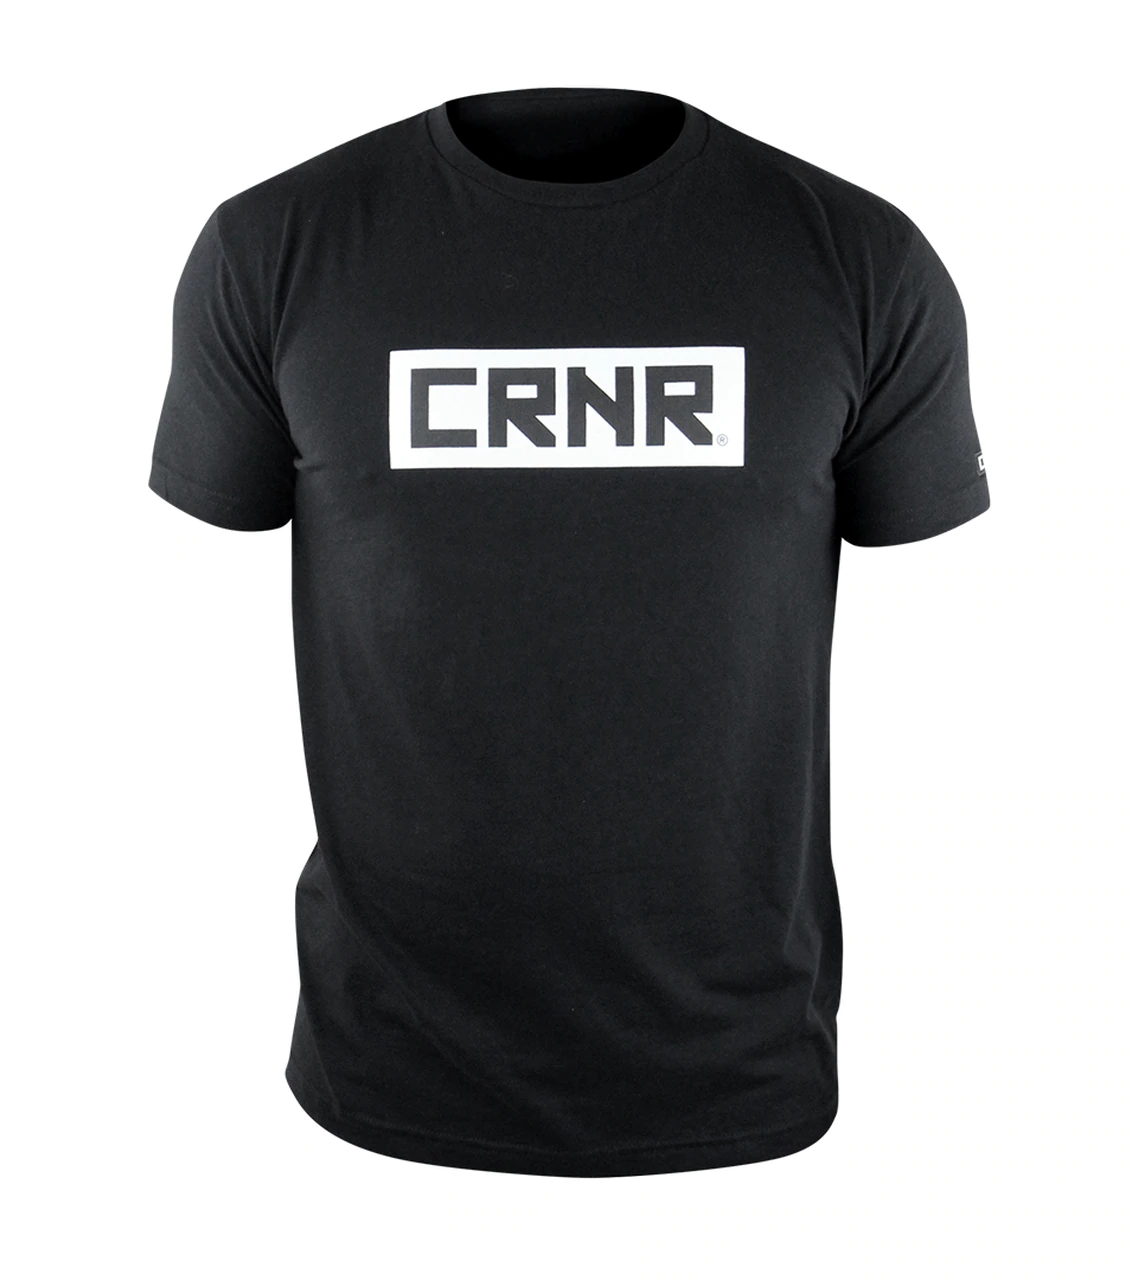 Frontal CRNR